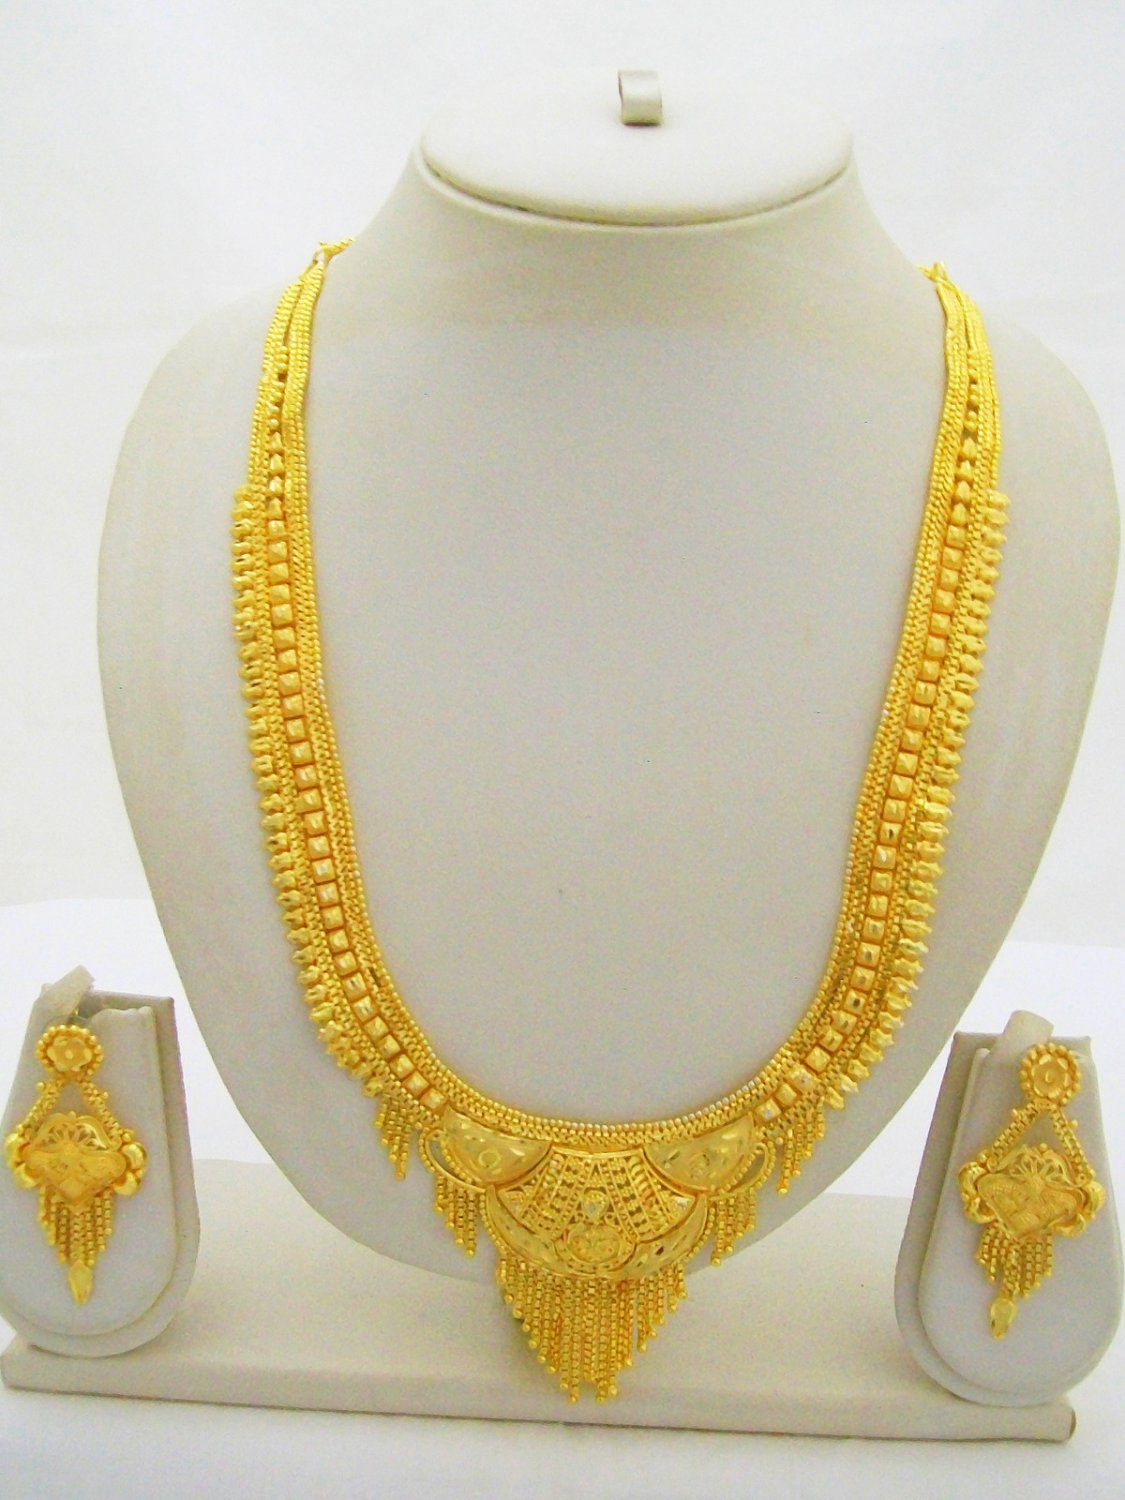 Gold Plated Indian Rani Haar Necklace Earring Filigree Long Ethnic ...